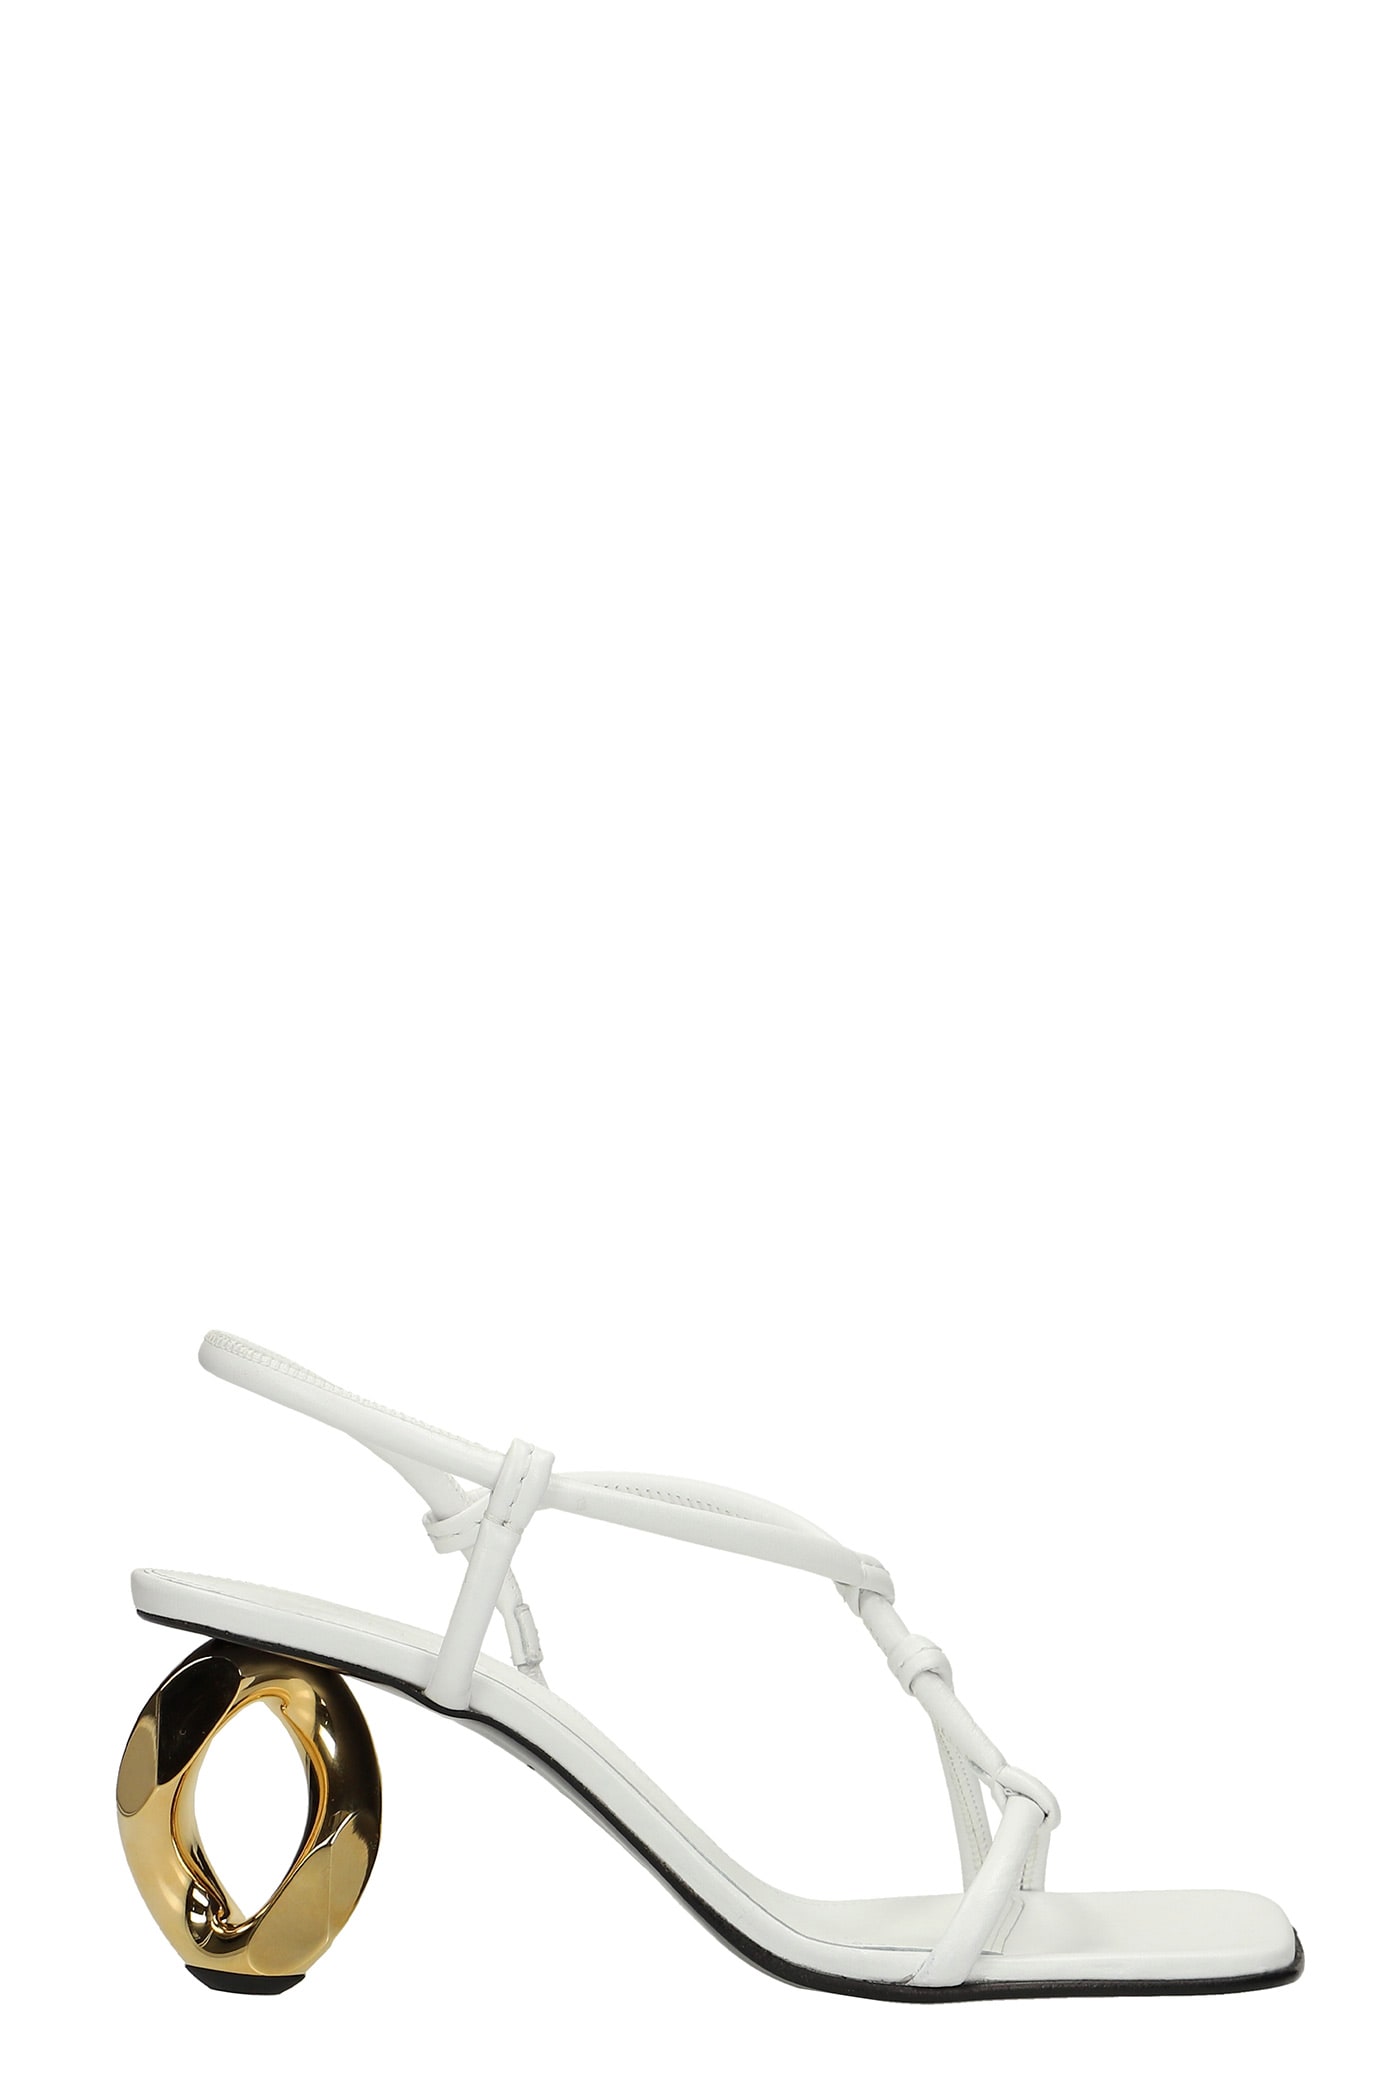 J.W. Anderson Sandals In White Leather